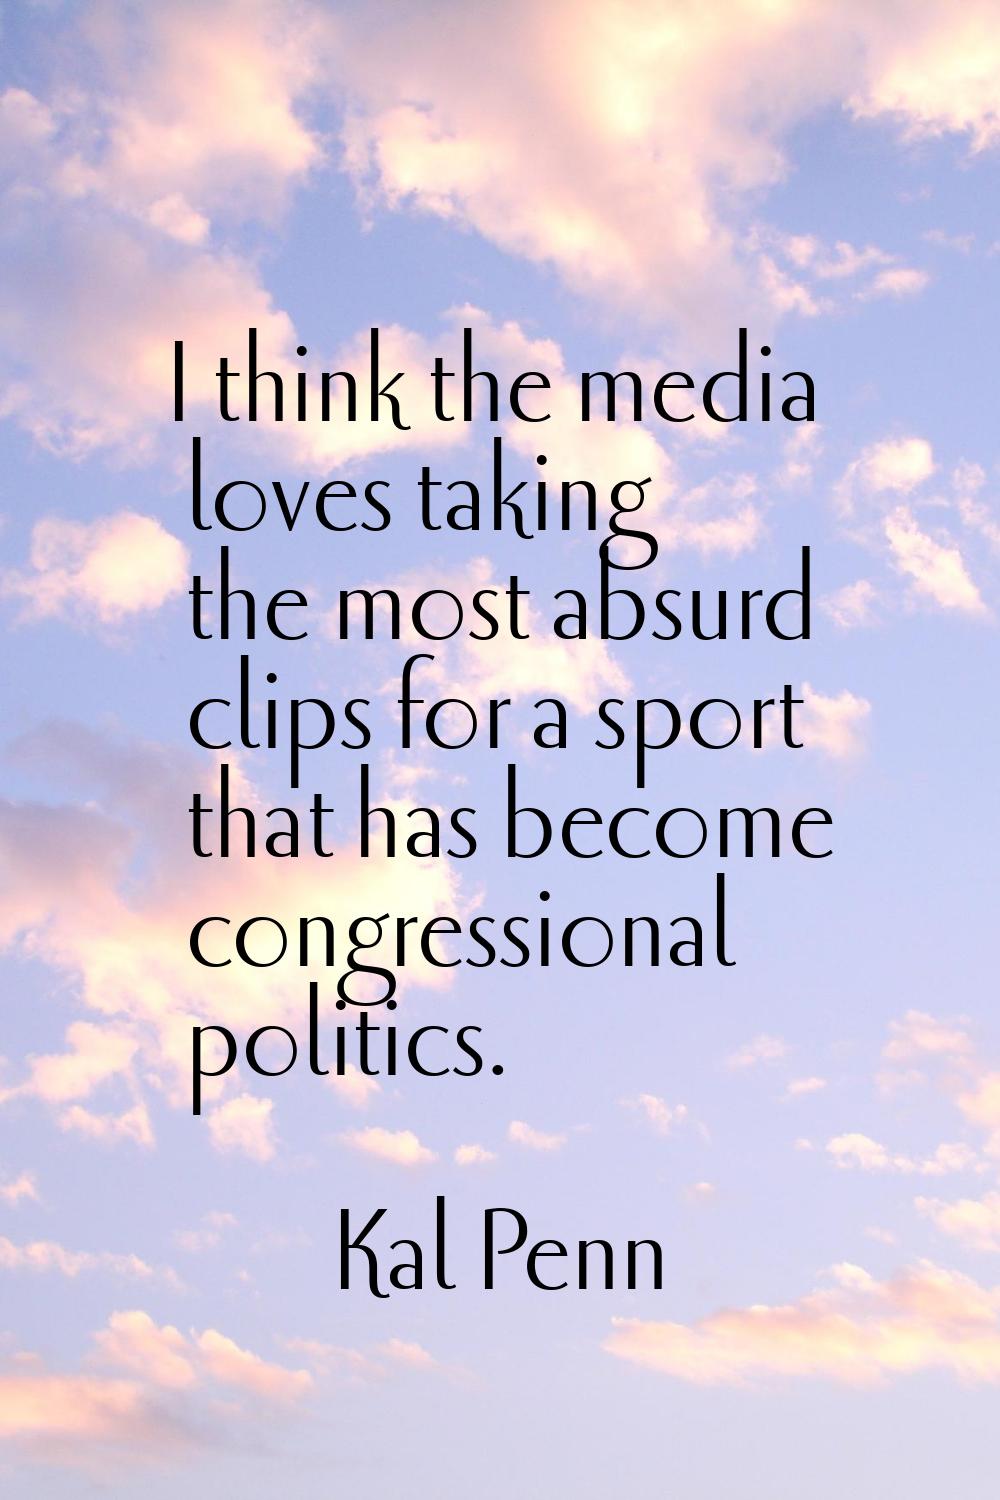 I think the media loves taking the most absurd clips for a sport that has become congressional poli